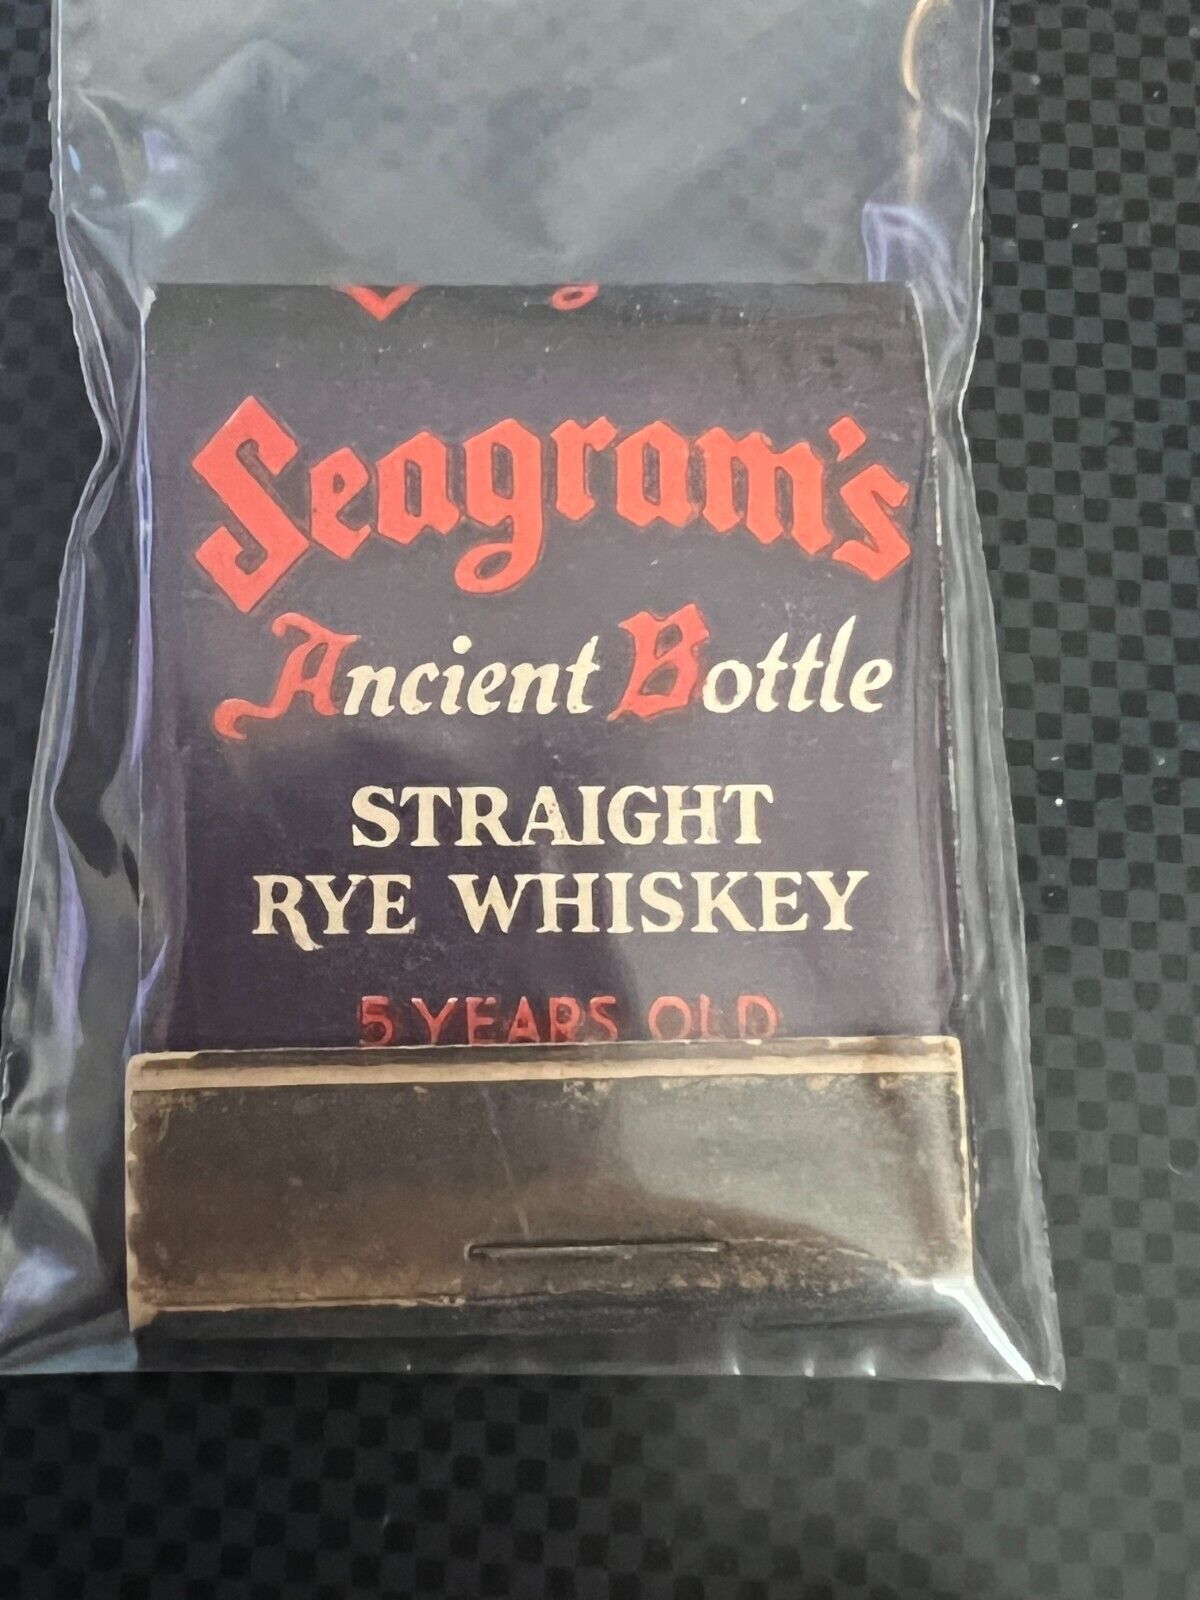 SEAGRAM\'S ANCIENT BOTTLE STRAIGHT RY WHISKEY MATCHBOOK - UNSTRUCK